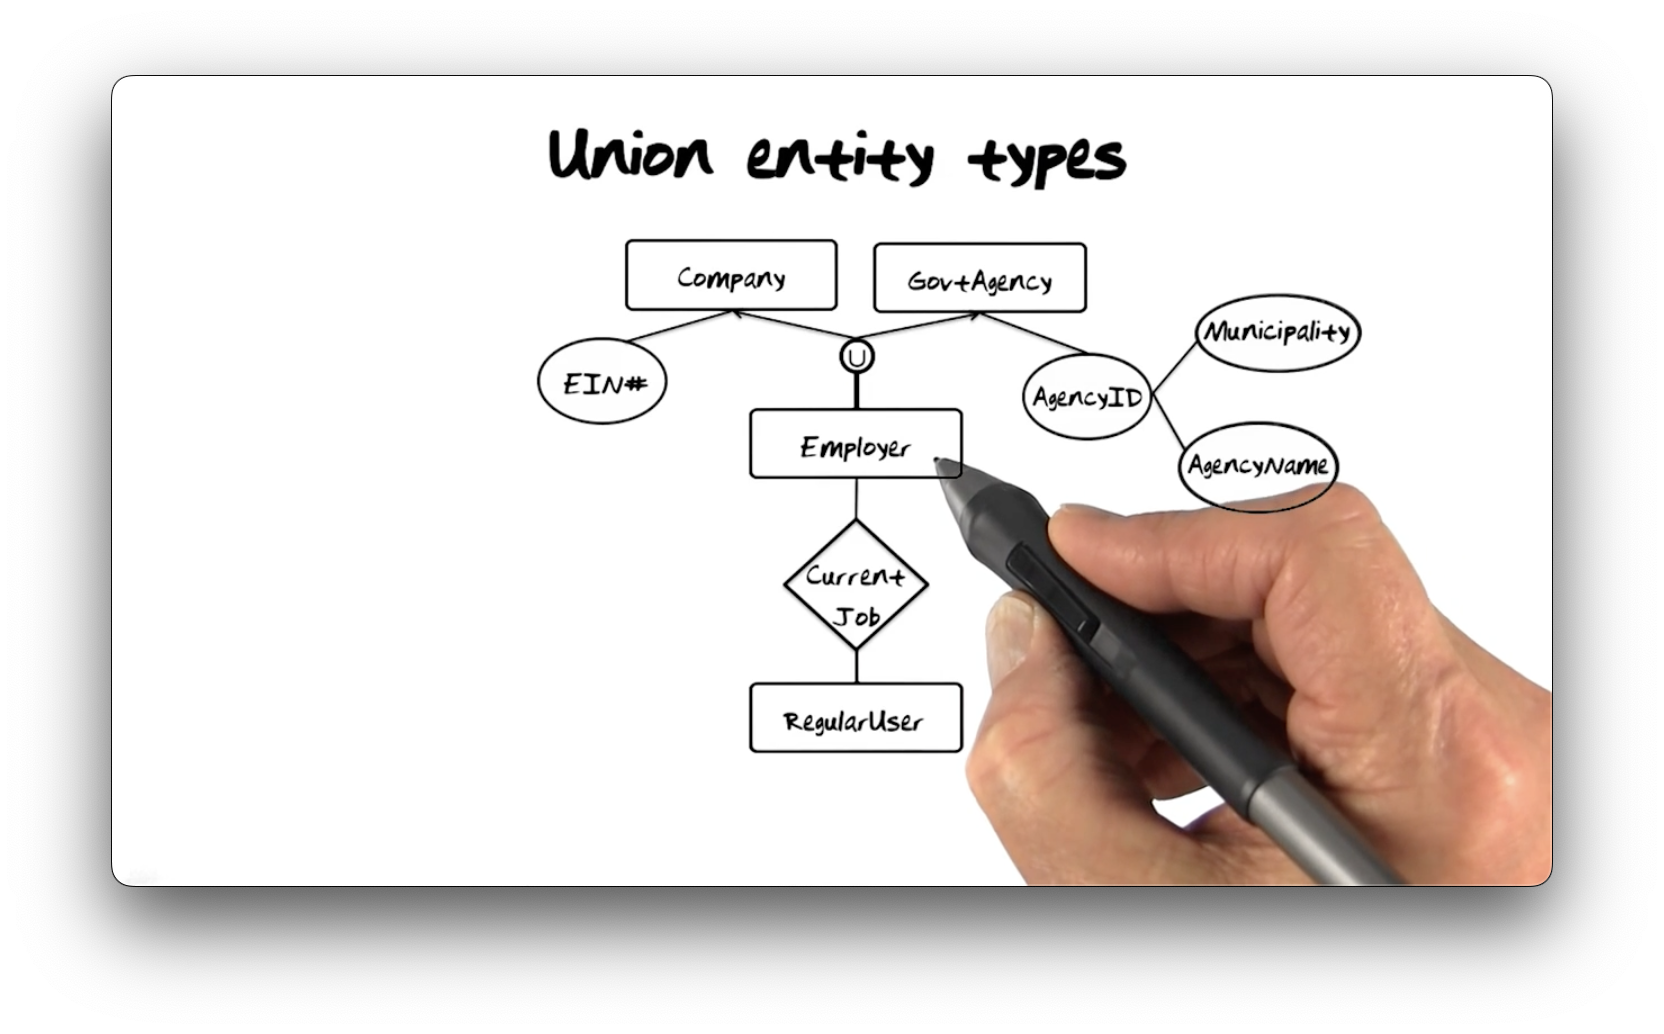 A relationship between a regular user and an employer, who may be either a
company or a government
agency.